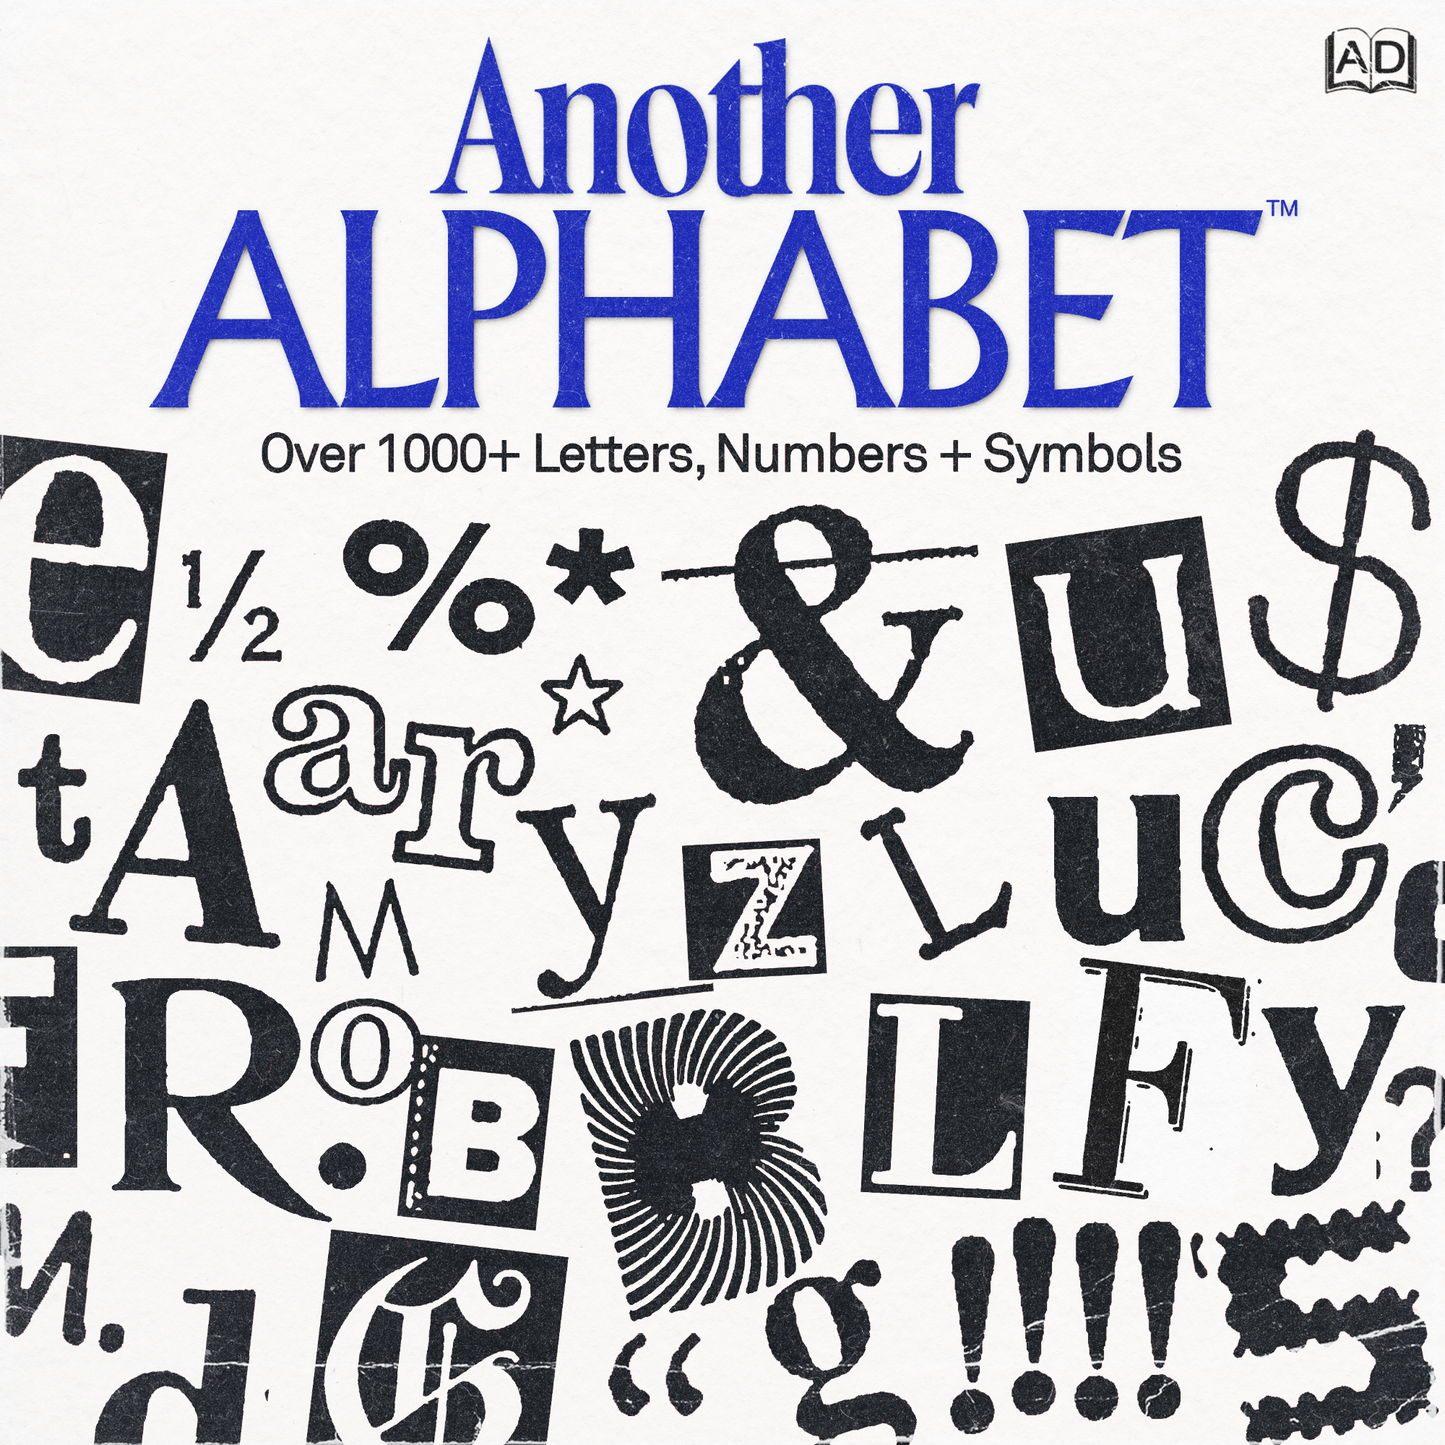 Another Alphabet™ 1000+ Letters + Numbers